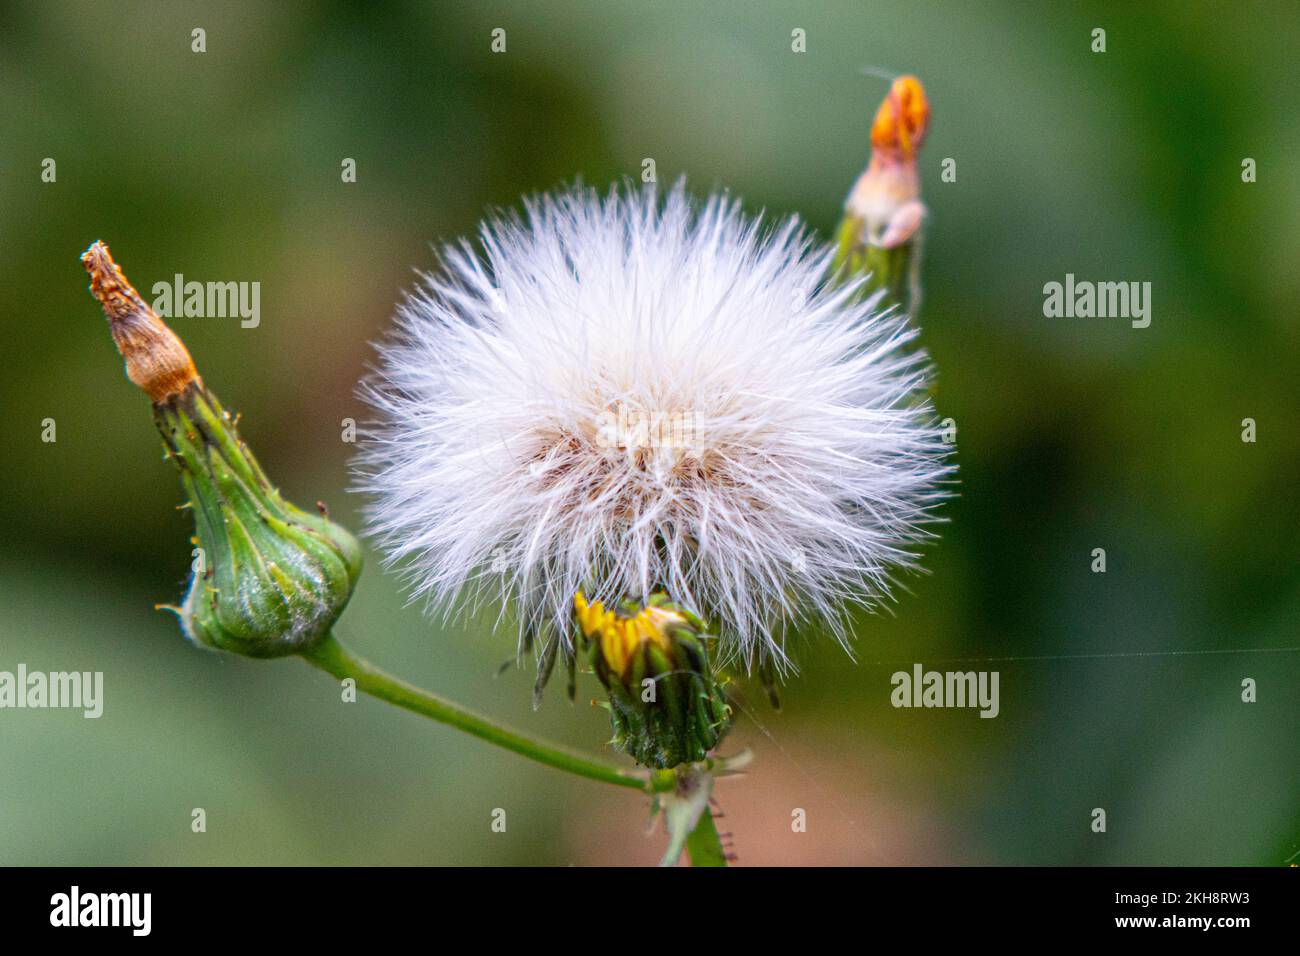 Thistledown seeds on a blurred background Stock Photo